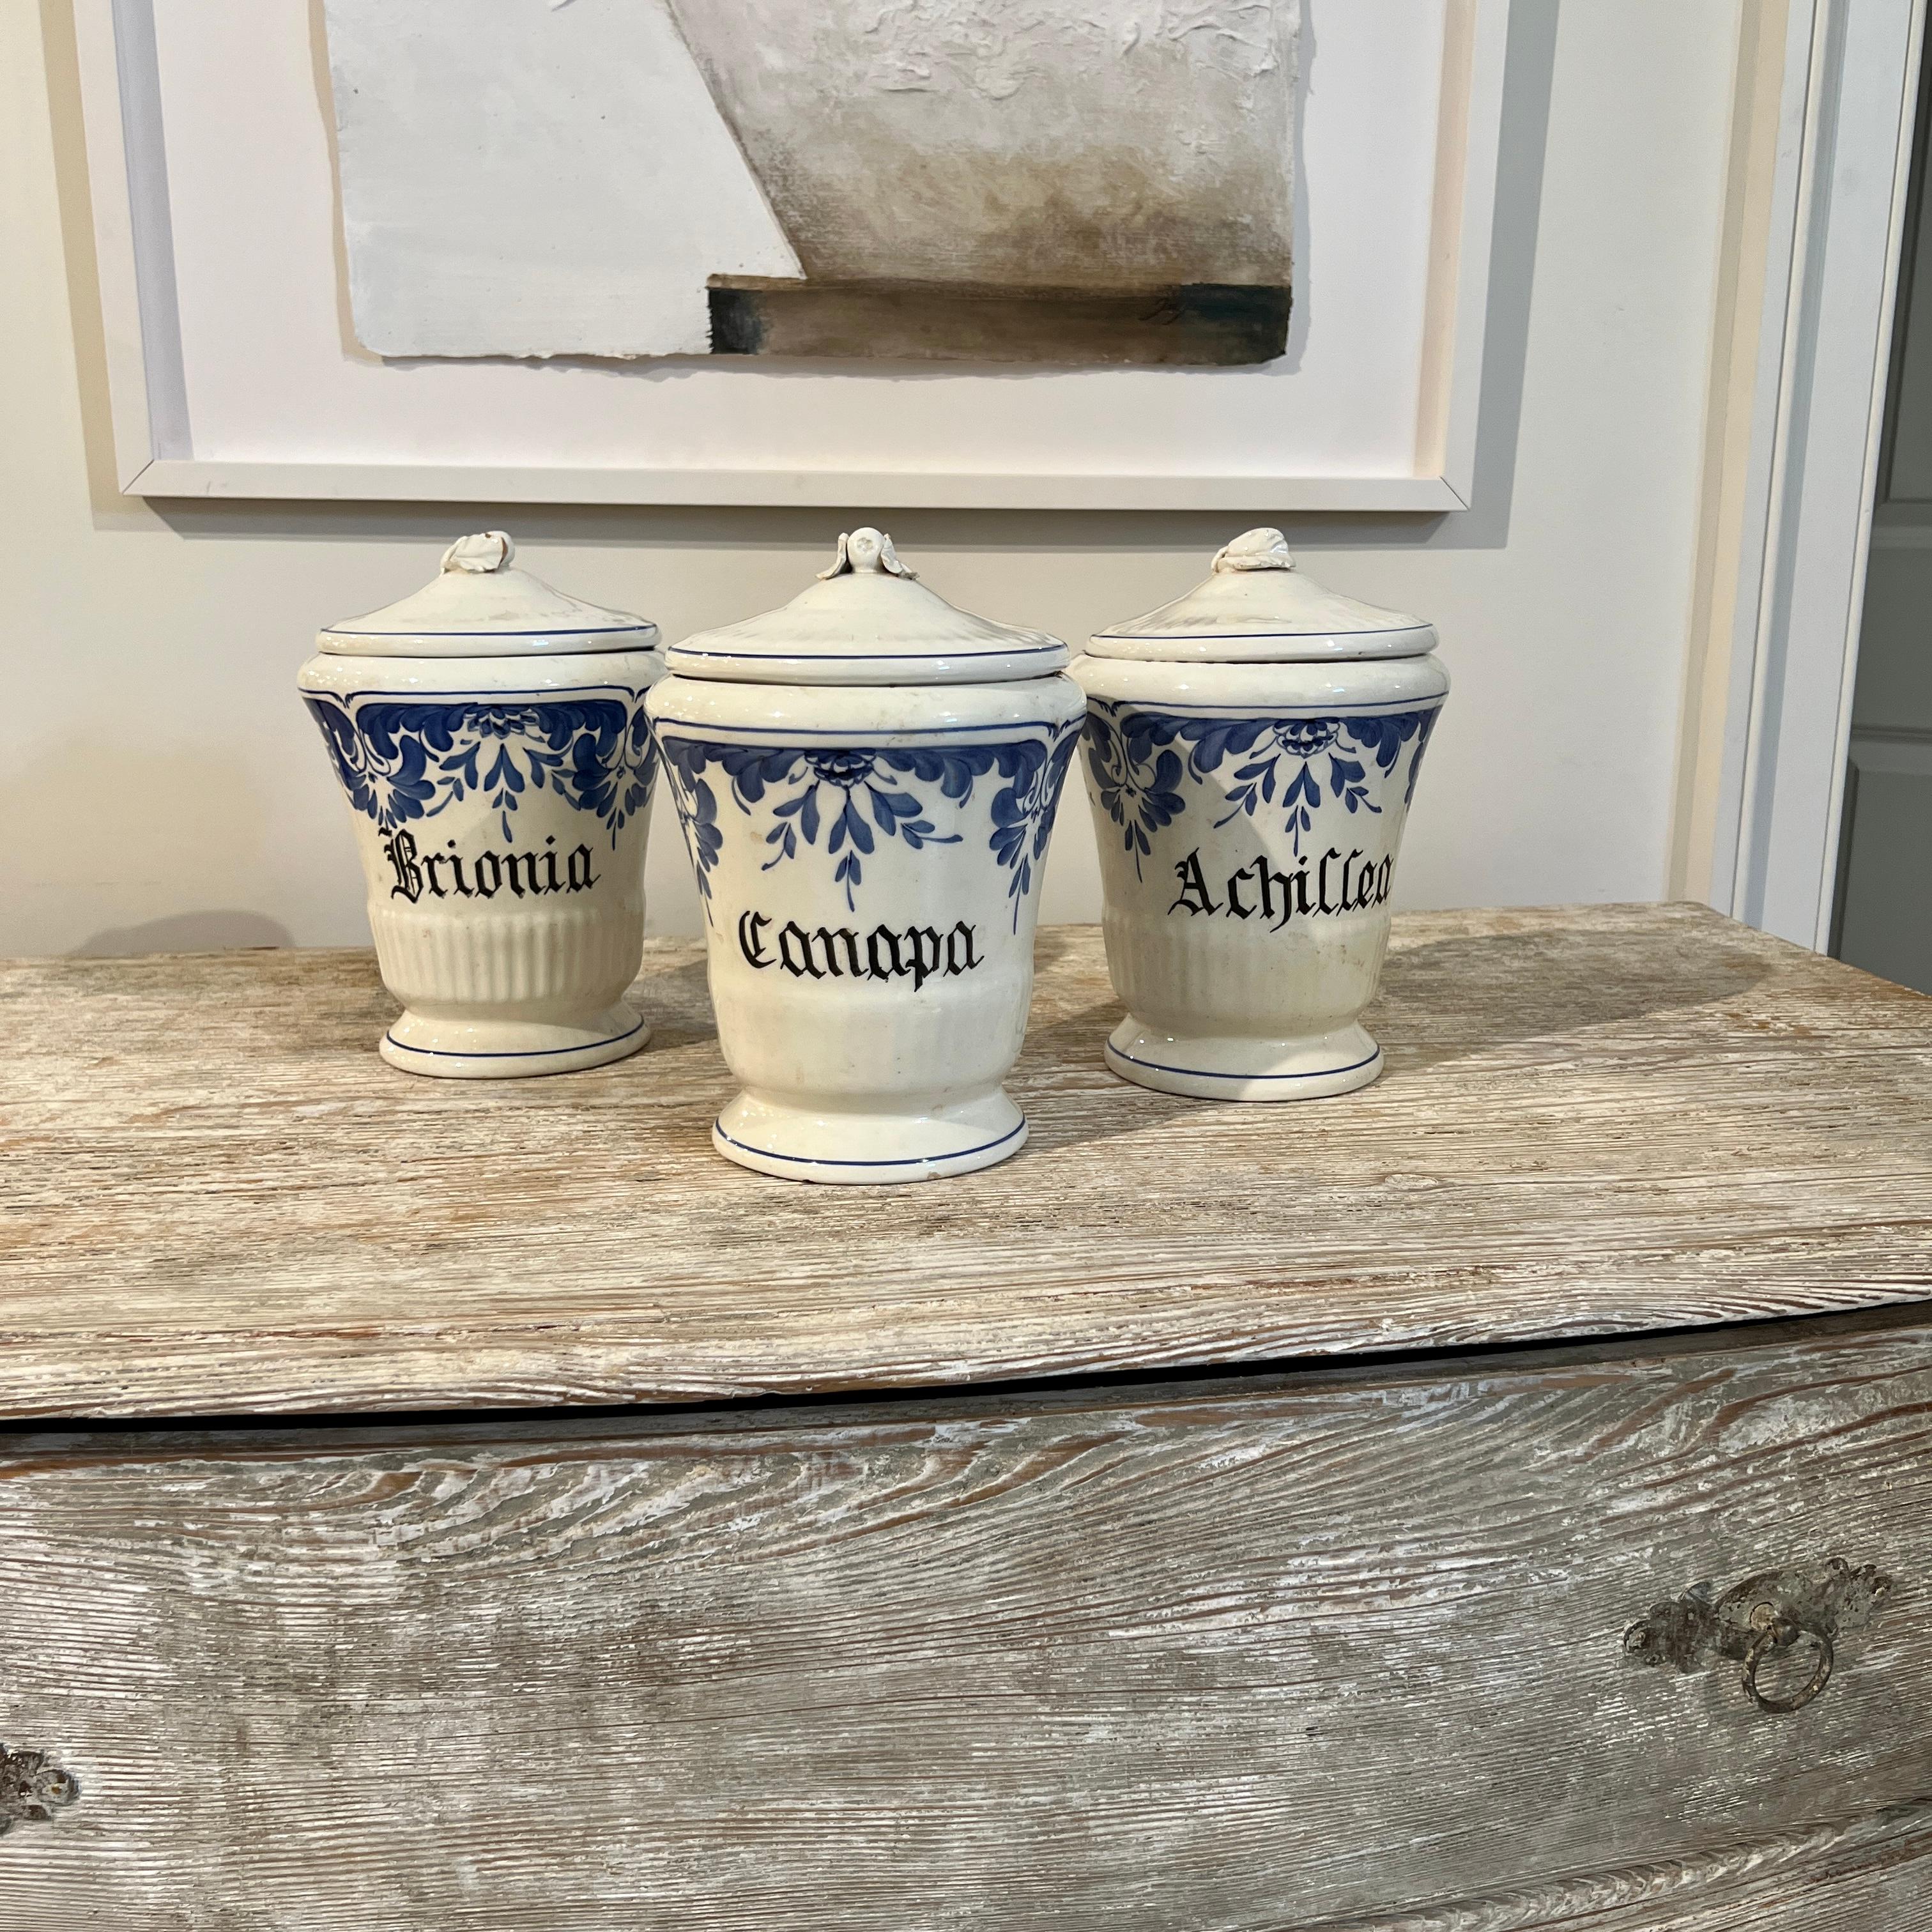 Set of seven kitchen or apothecary jars.  Six have lids.  Glazed blue and white with hand lettering in black.  A beautiful set.